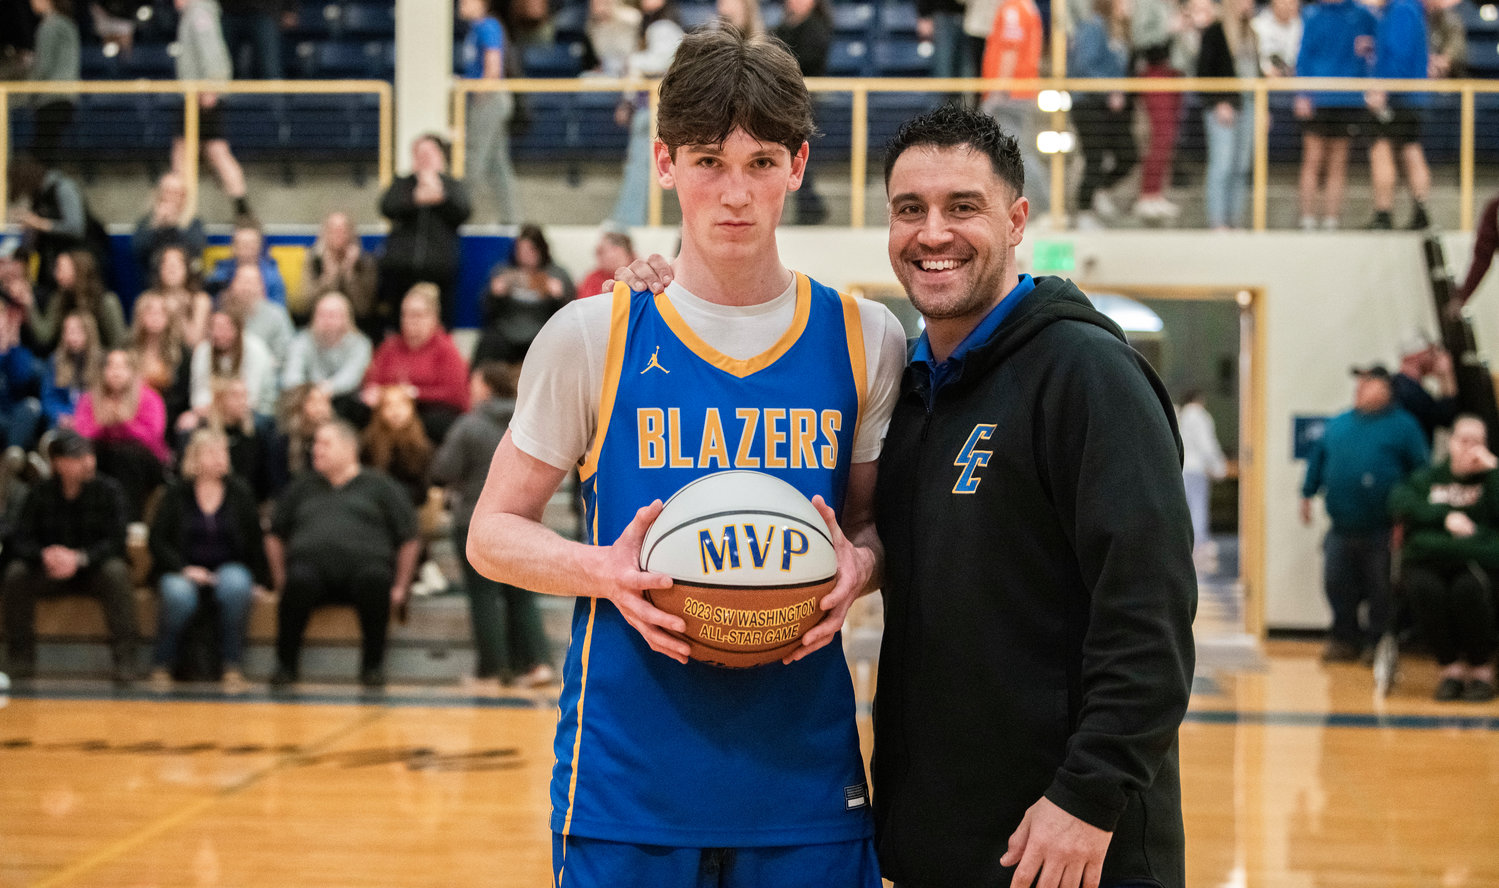 MVP Shay Brannon, of Eatonville, poses for a photo with Joe Chirhart after a Southwest Washington High School All-Star game at Centralia College Friday night.